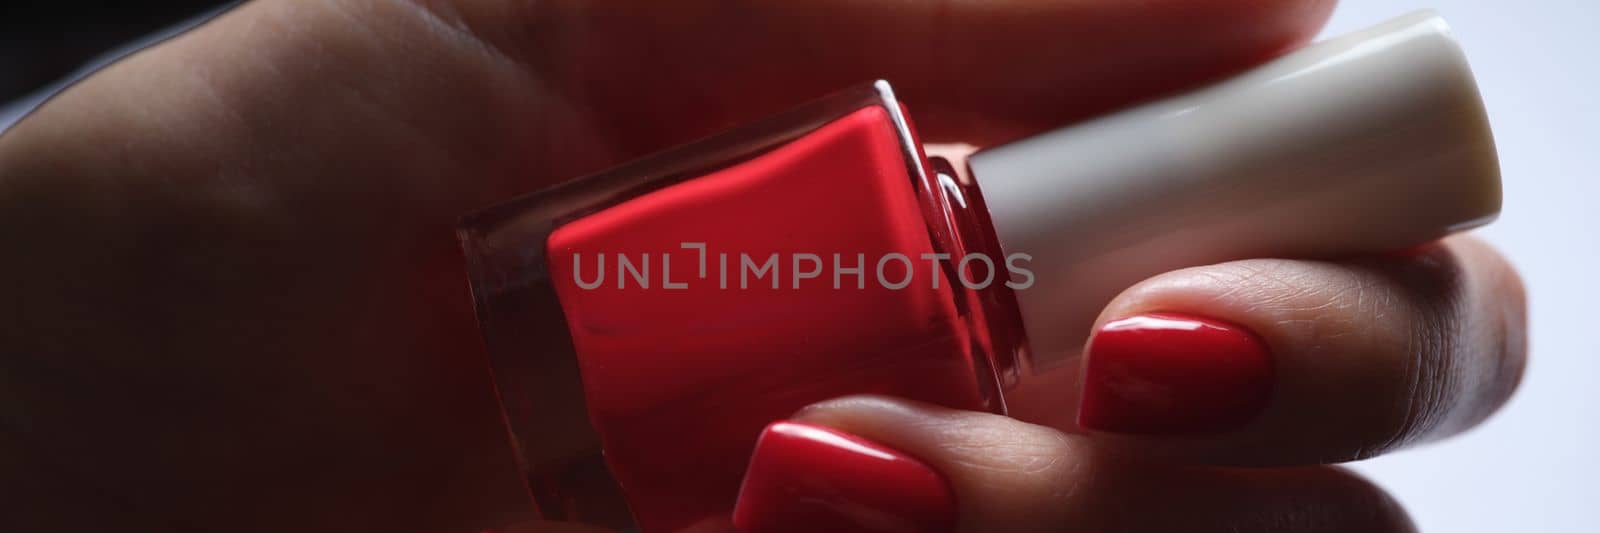 Hands with red manicure and bottle of nail polish. Beautiful stylish nails concept